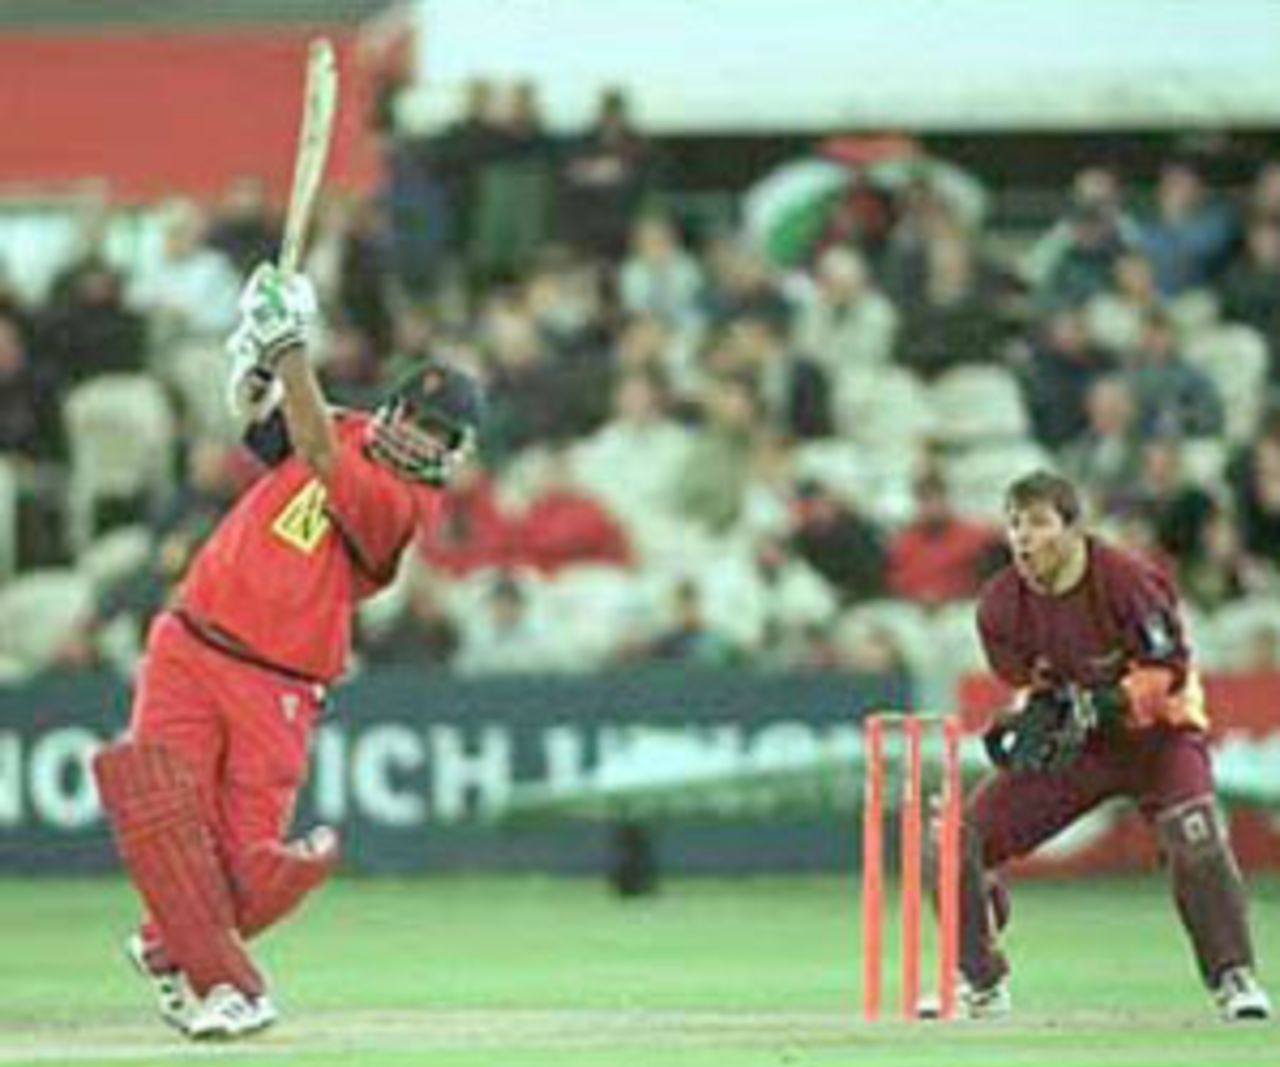 Ganguly steps down the track to drive the ball, National League Division One, 2000, Lancashire v Northamptonshire, Old Trafford, Manchester, 23 June 2000.